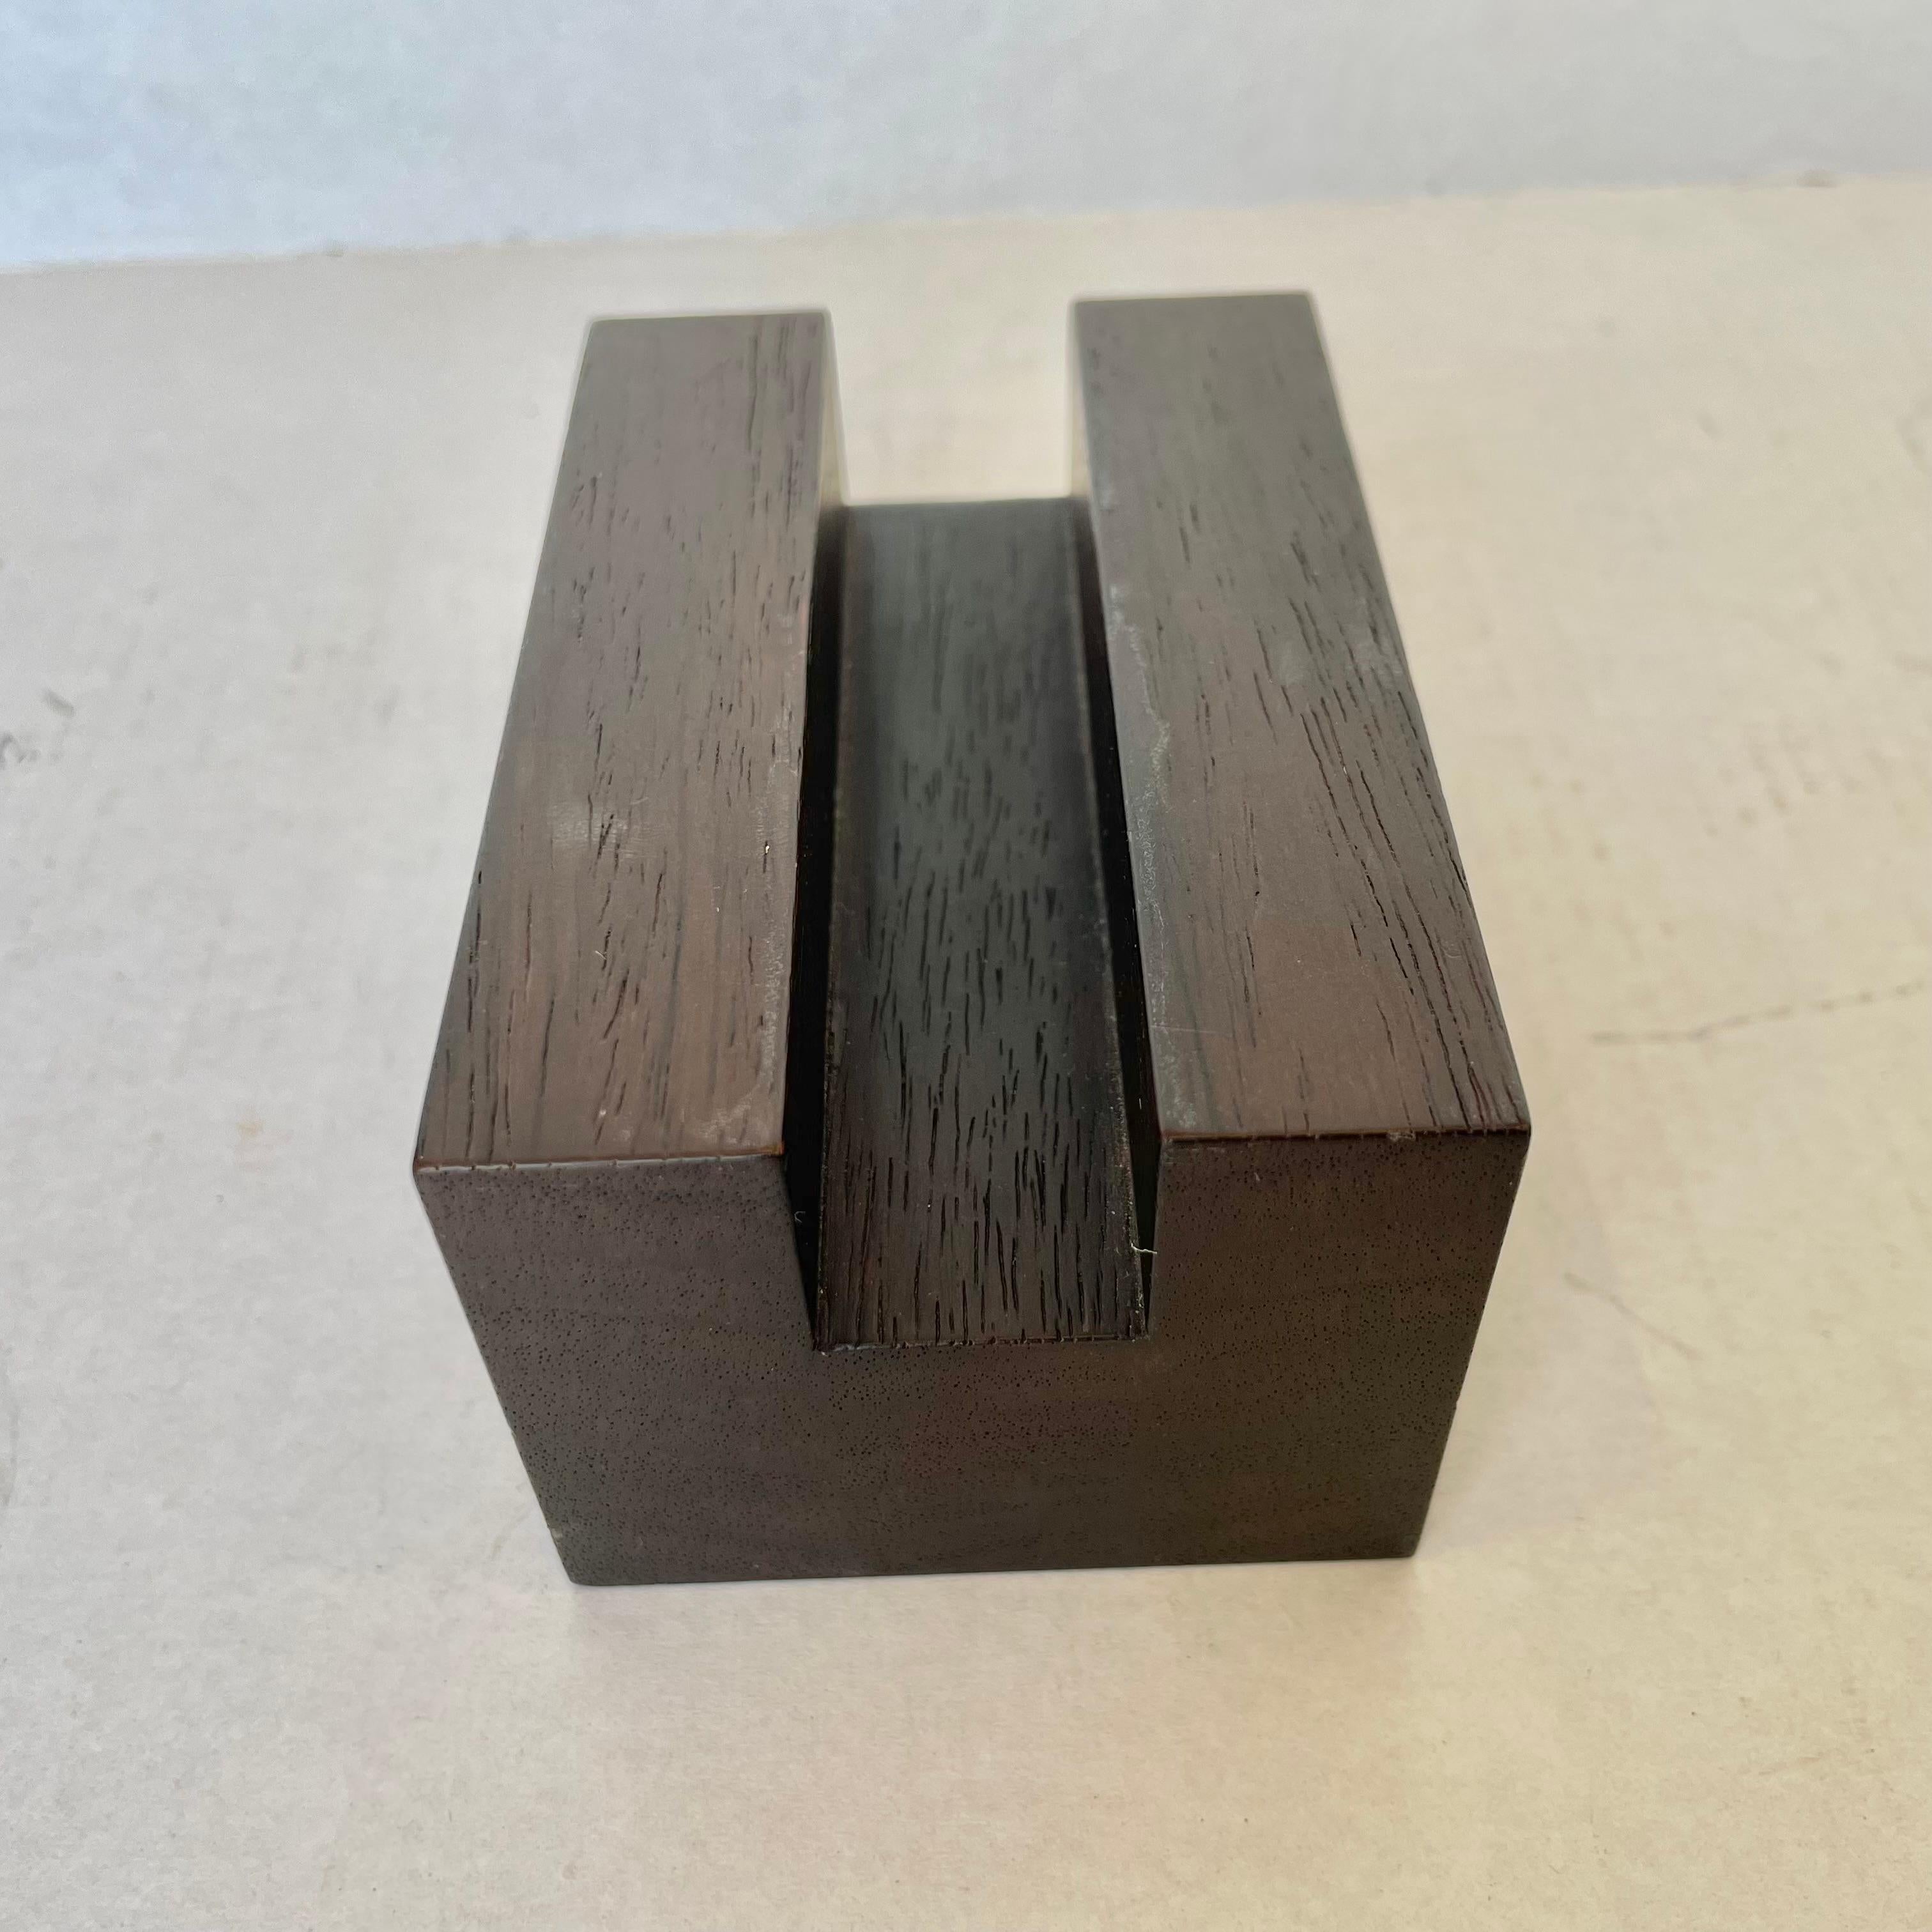 Hermes Wood and Leather Business Card Holder, 2000s France For Sale 1